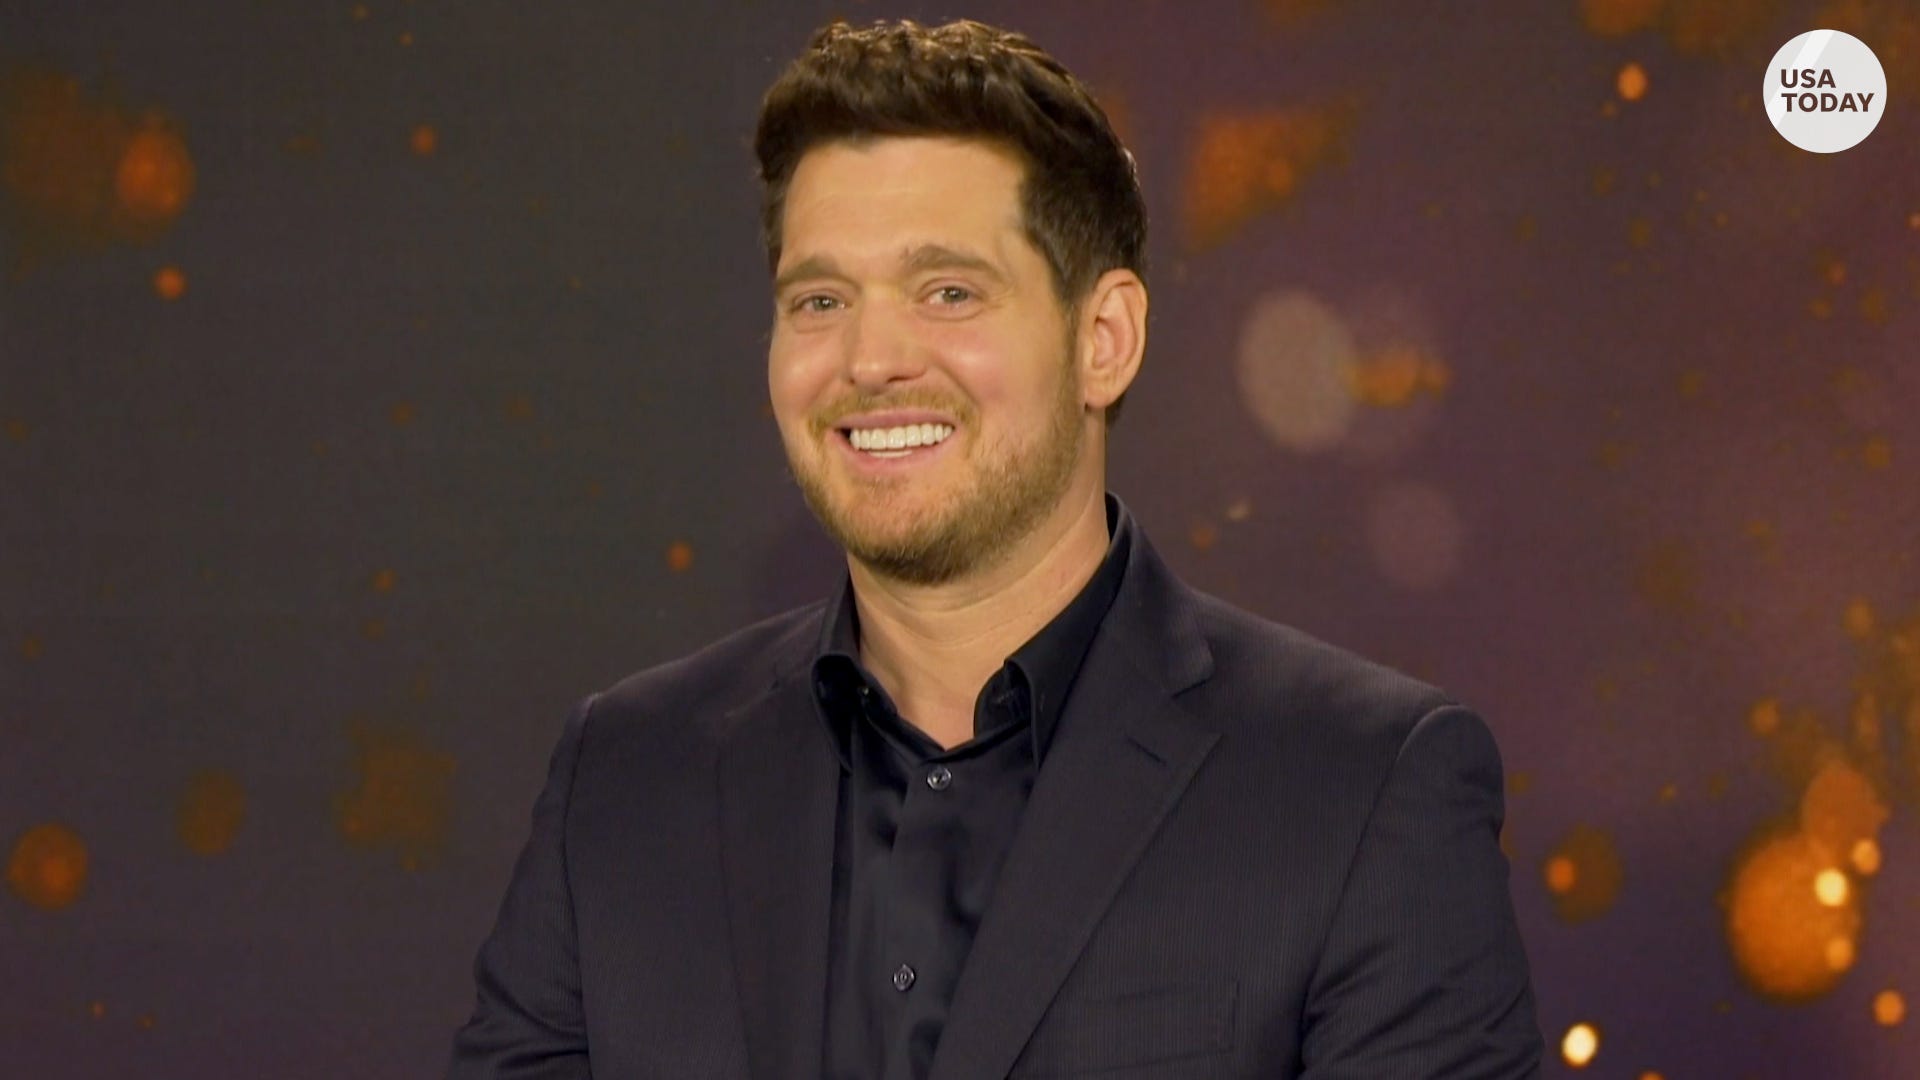 Michael Bublé reveals his favorite Christmas song to perform, and it'll surprise you